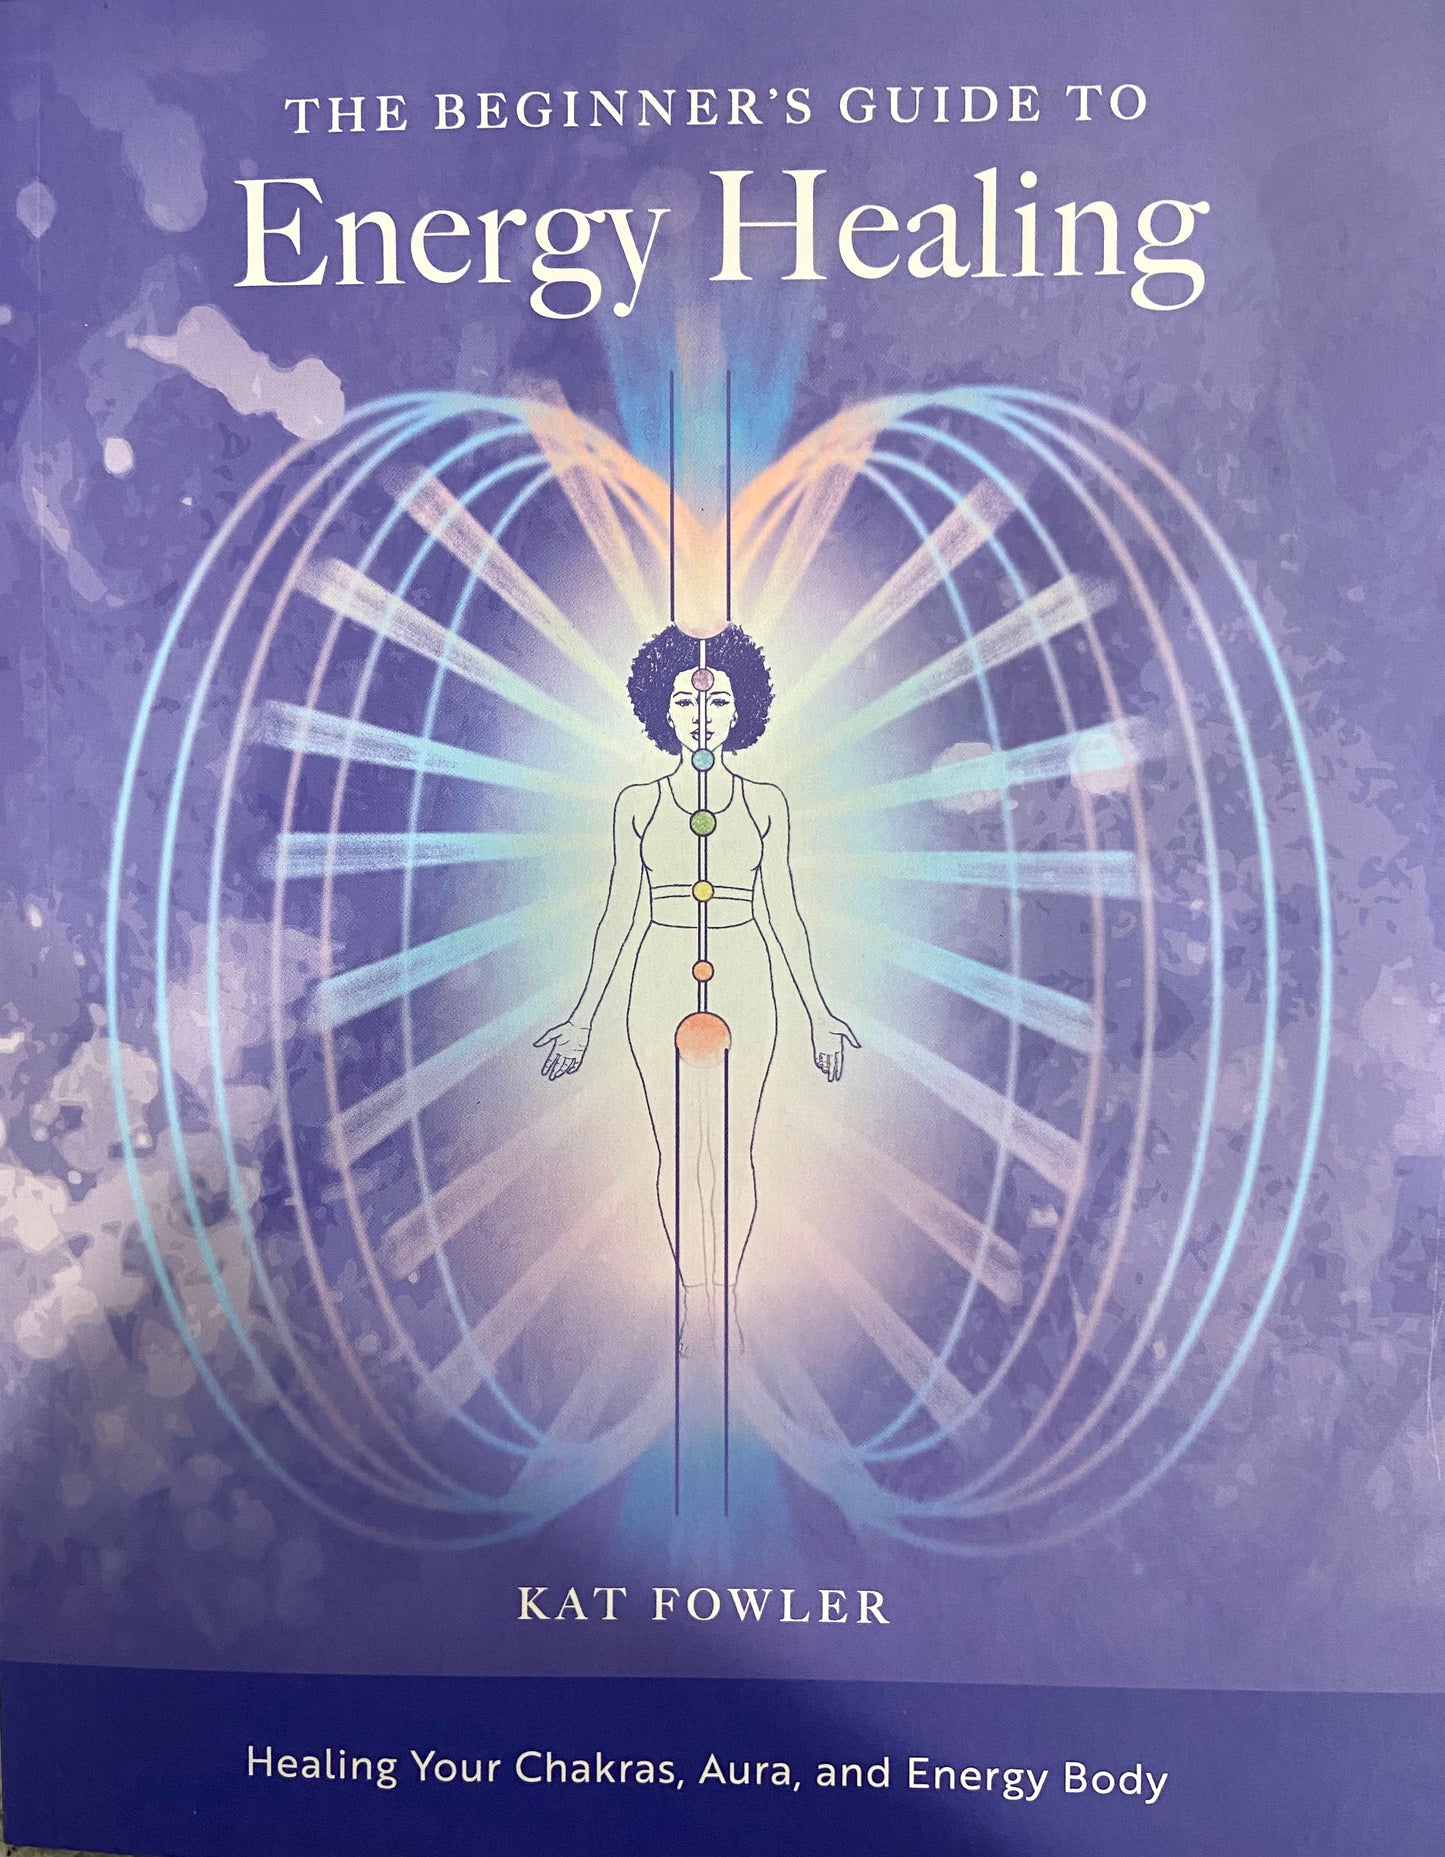 The beginners guide to energy healing